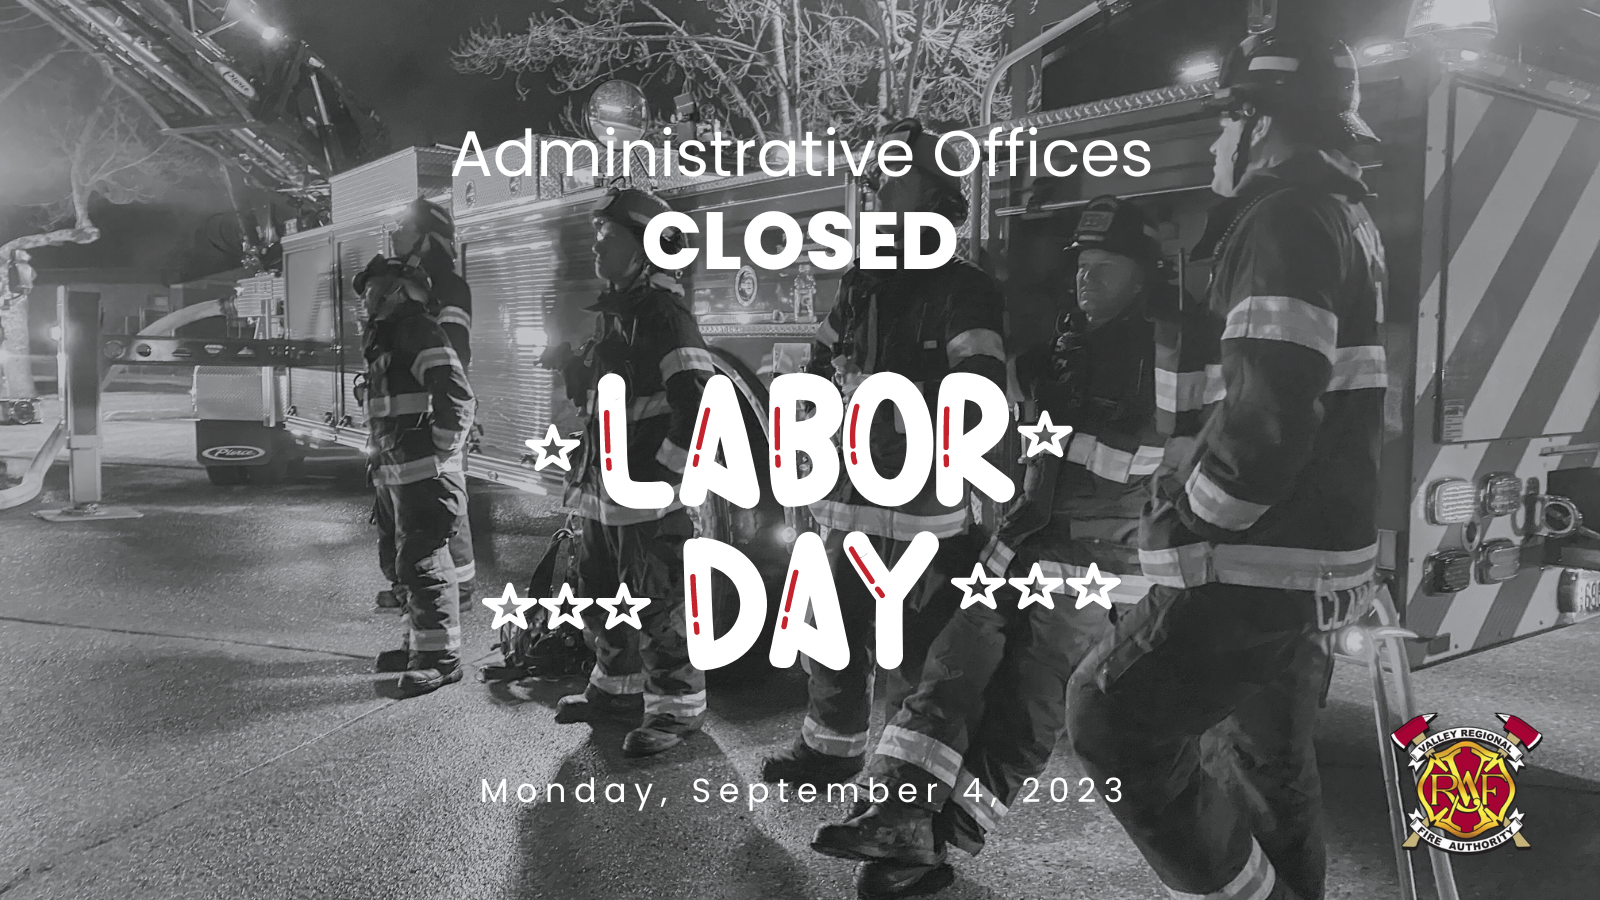 Administrative offices of the Valley Regional Fire Authority will be closed for Labor Day.